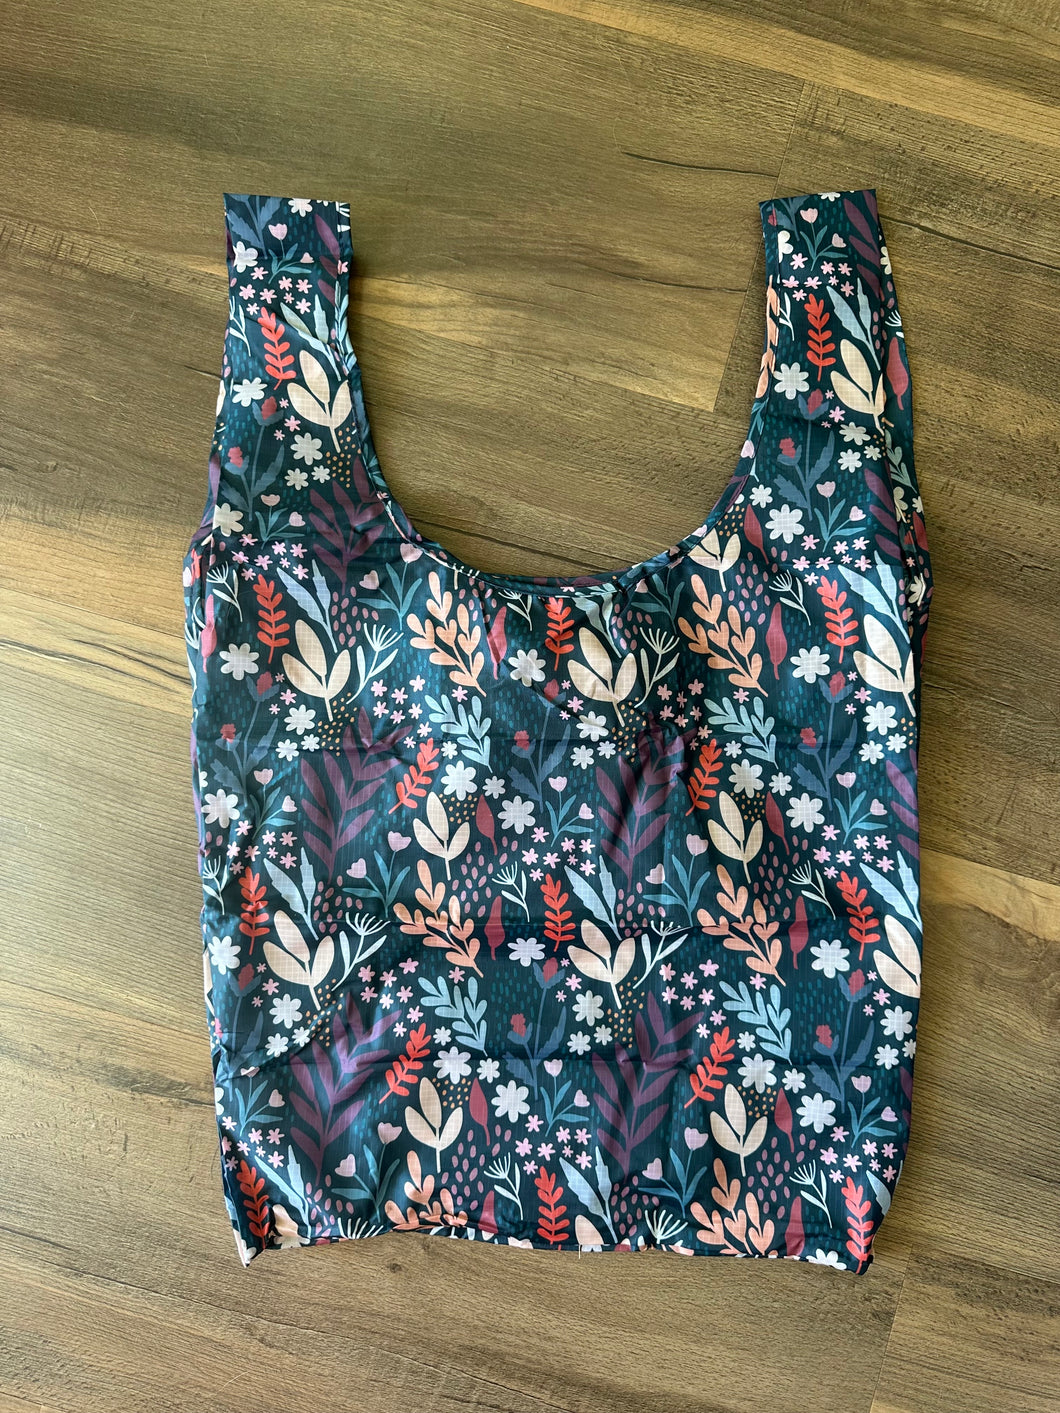 Whimsical Florals Packable Tote Bag